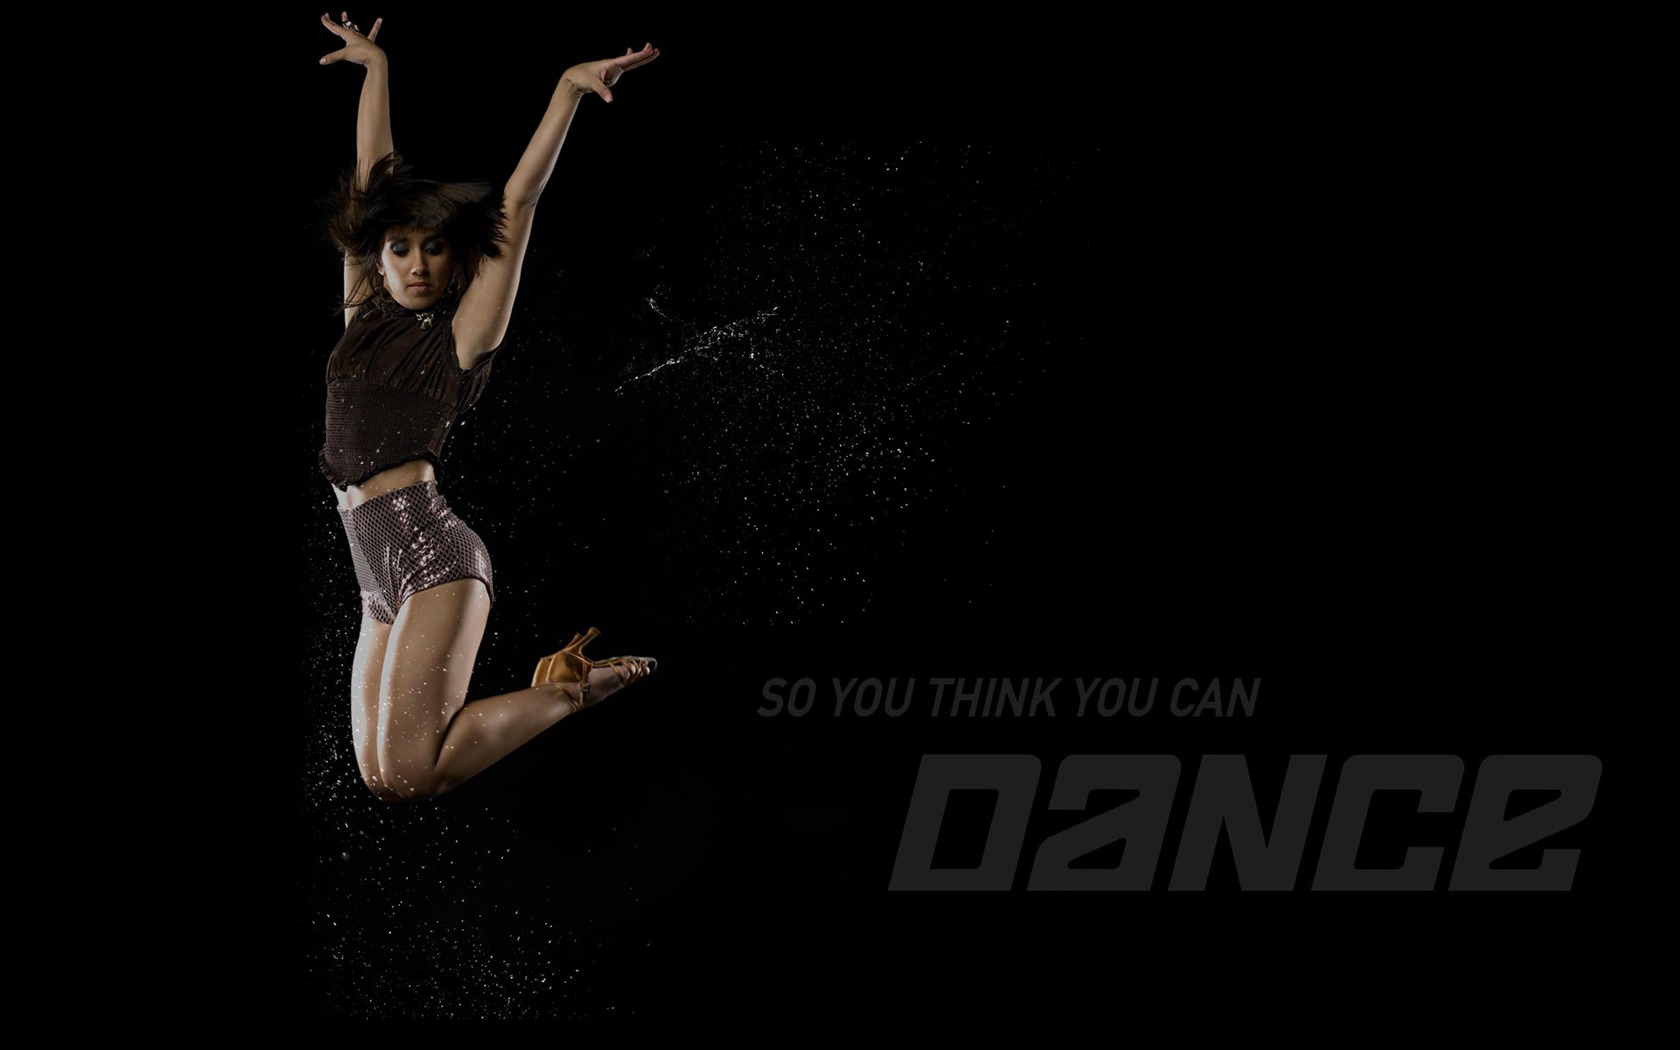 So You Think You Can Dance wallpaper (1) #11 - 1680x1050